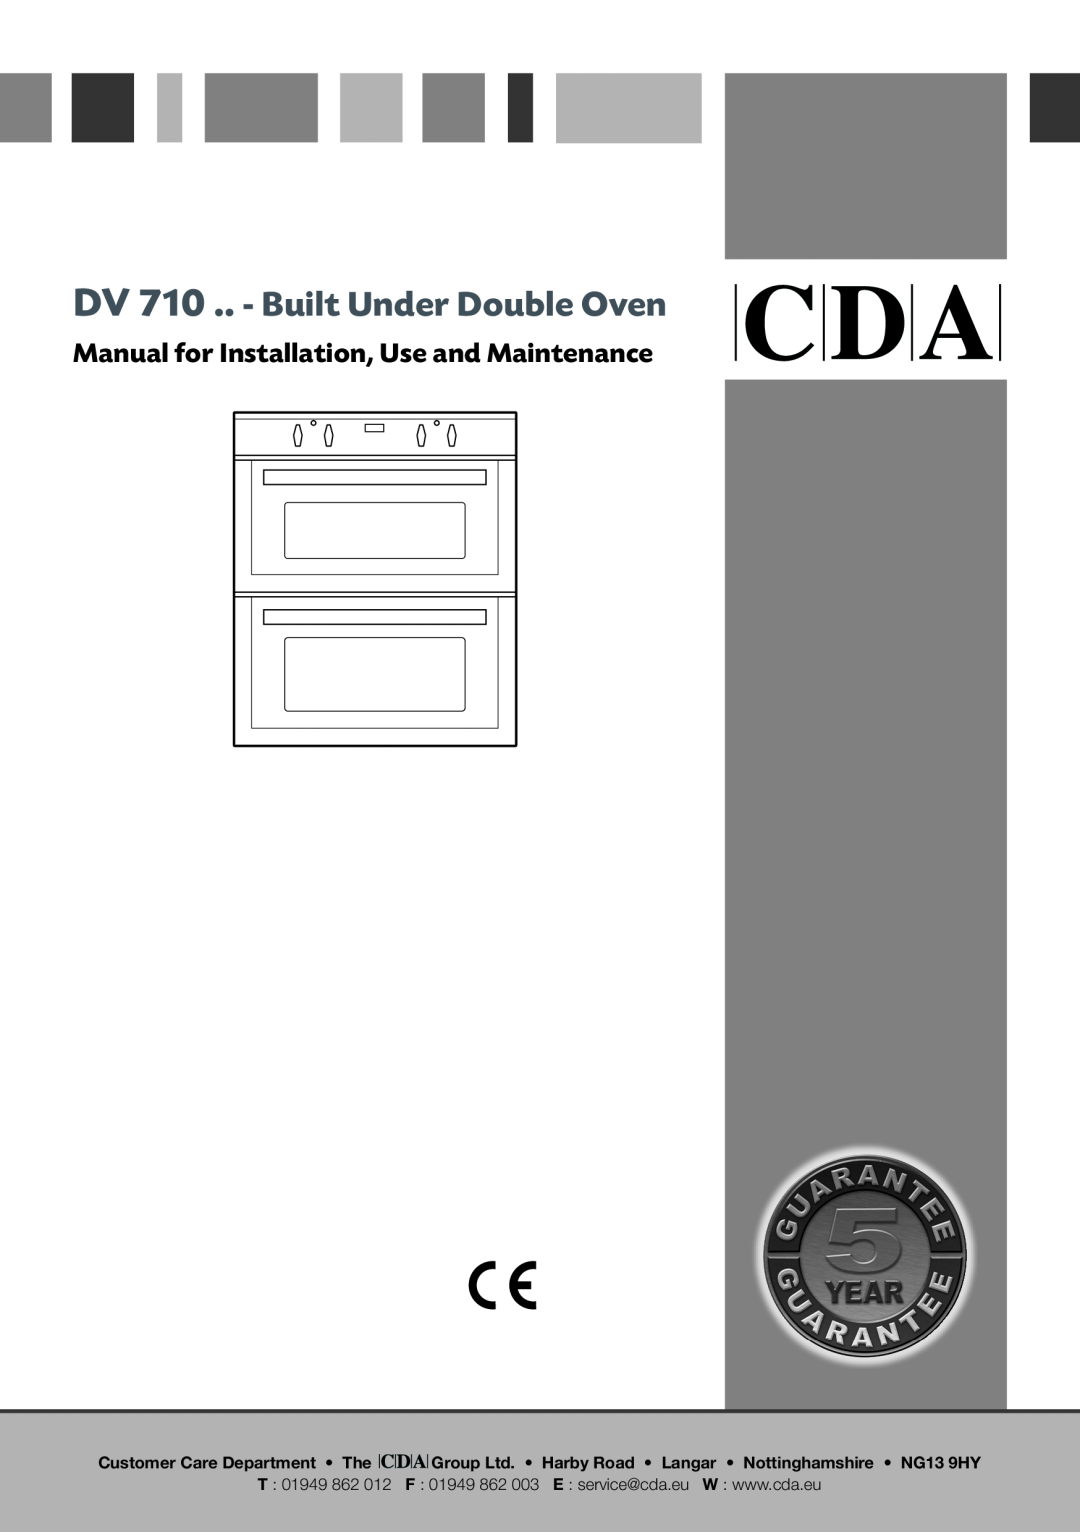 CDA manual DV 710 .. - Built Under Double Oven, Manual for Installation, Use and Maintenance, T 01949 862 